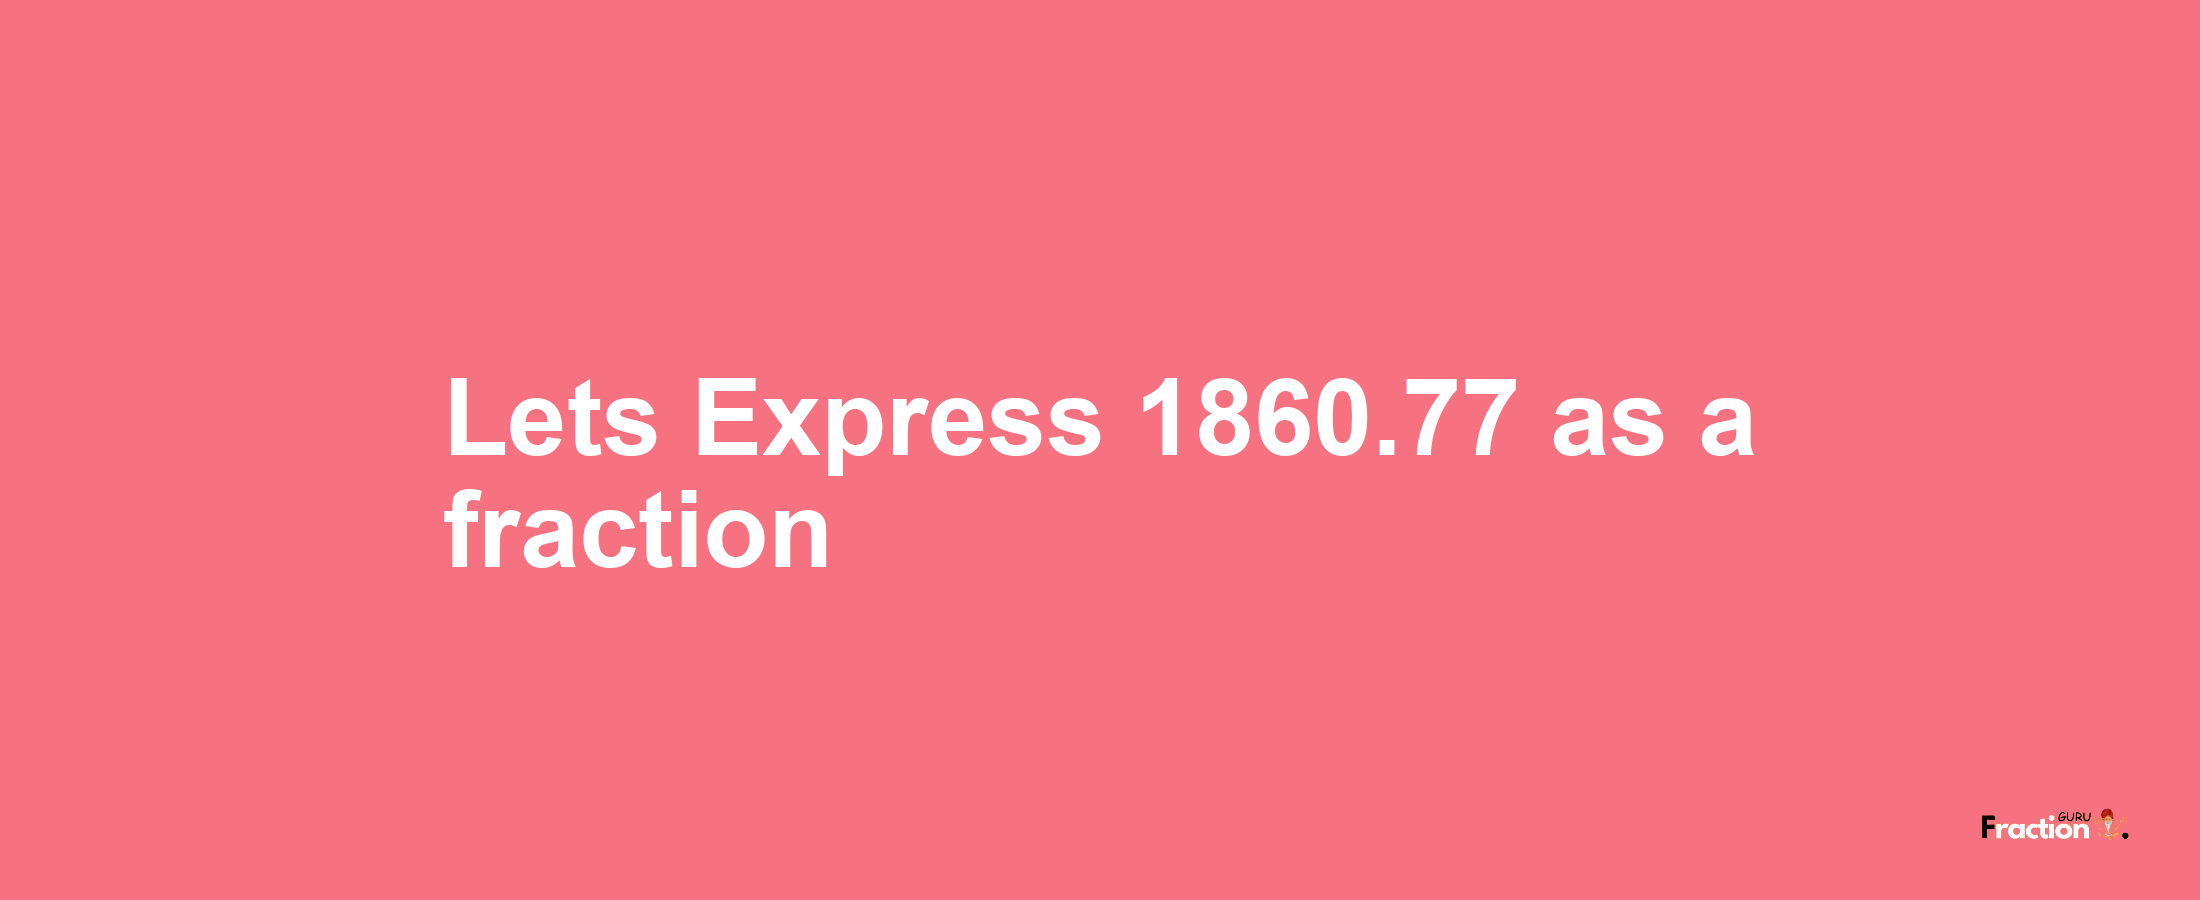 Lets Express 1860.77 as afraction